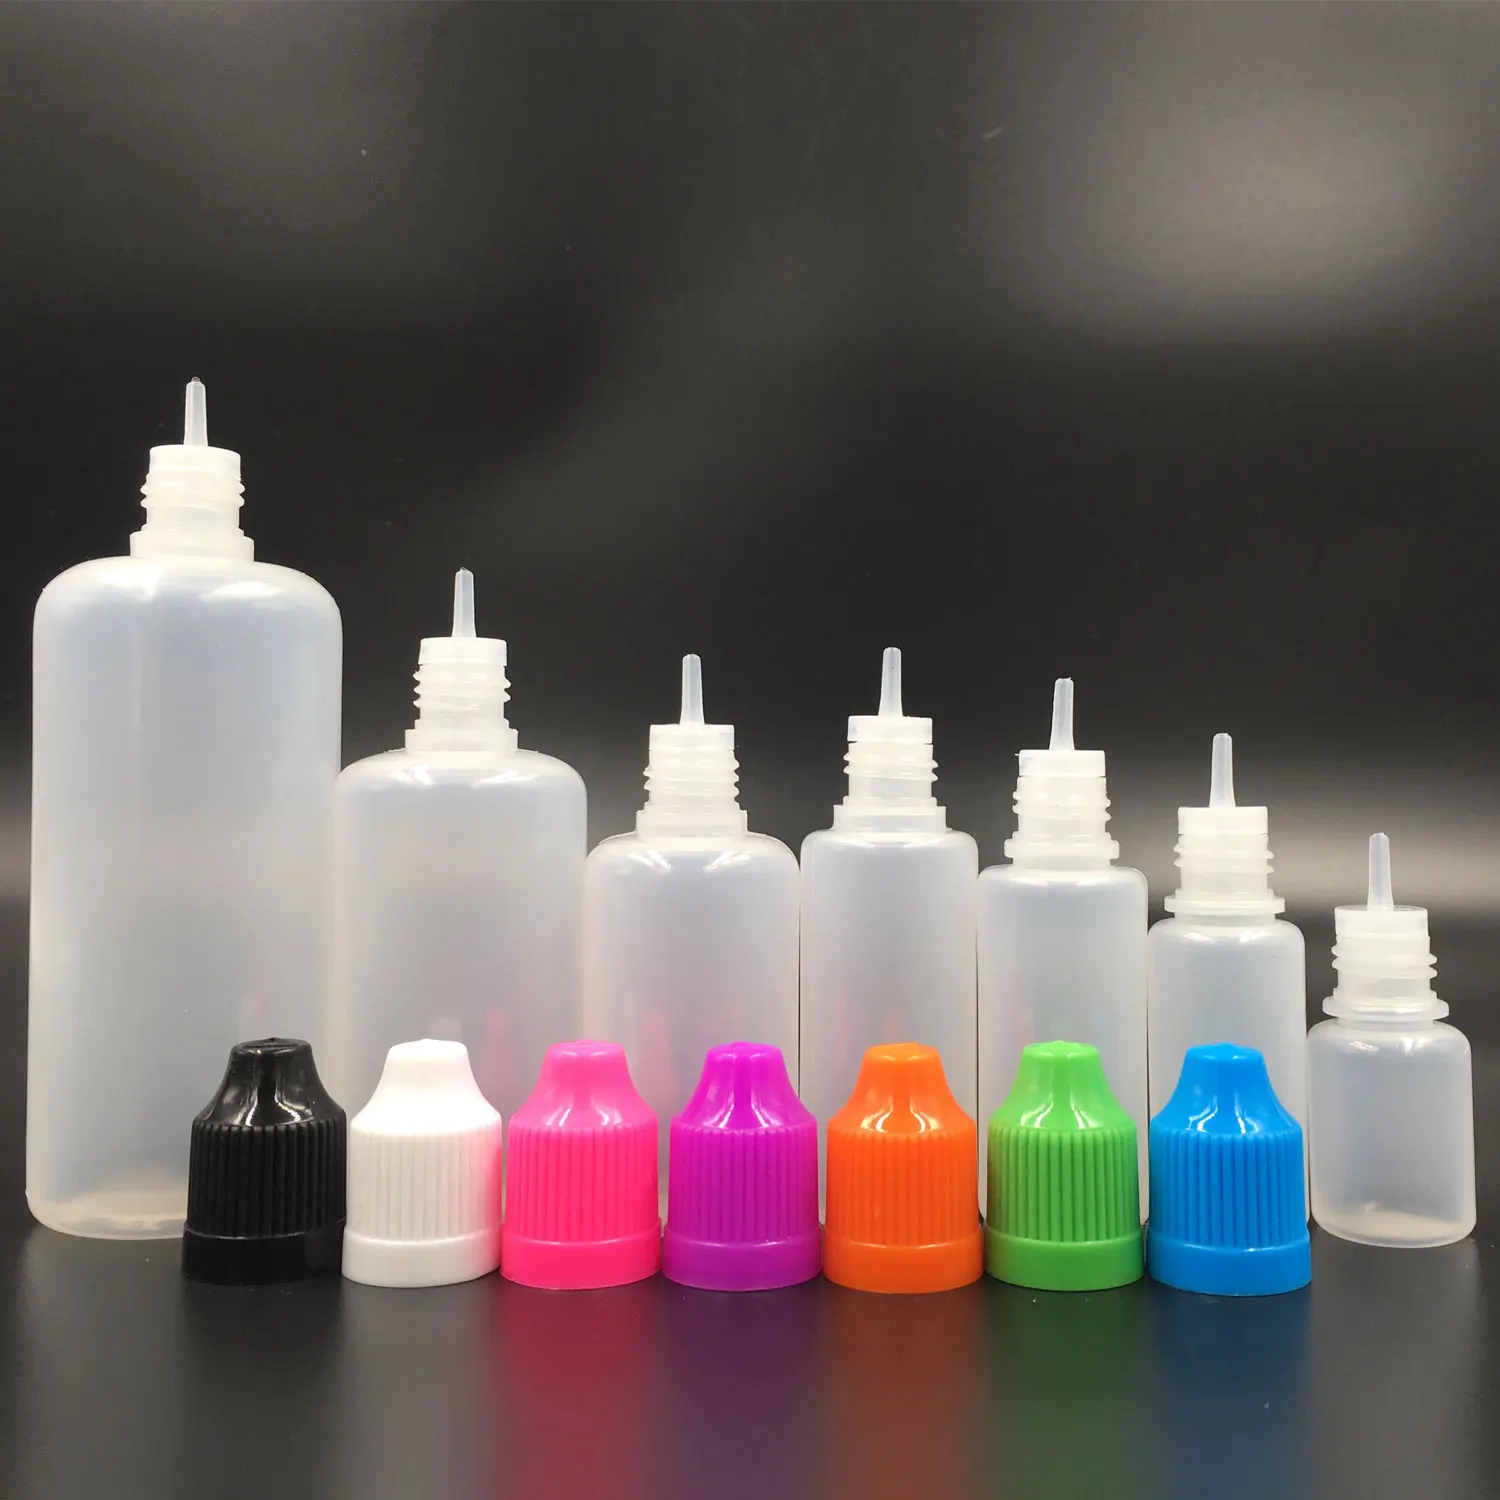 10pcs 5ml-120ml Empty Soft LDPE Dropper Bottles Plastic Containers for E Liquid Vape Bottle with Mixed Caps Lid Plugs digital 16 channel oscilloscope logic analyzer storage mixed signal with oscilloscope function 1gsa s mso5062d